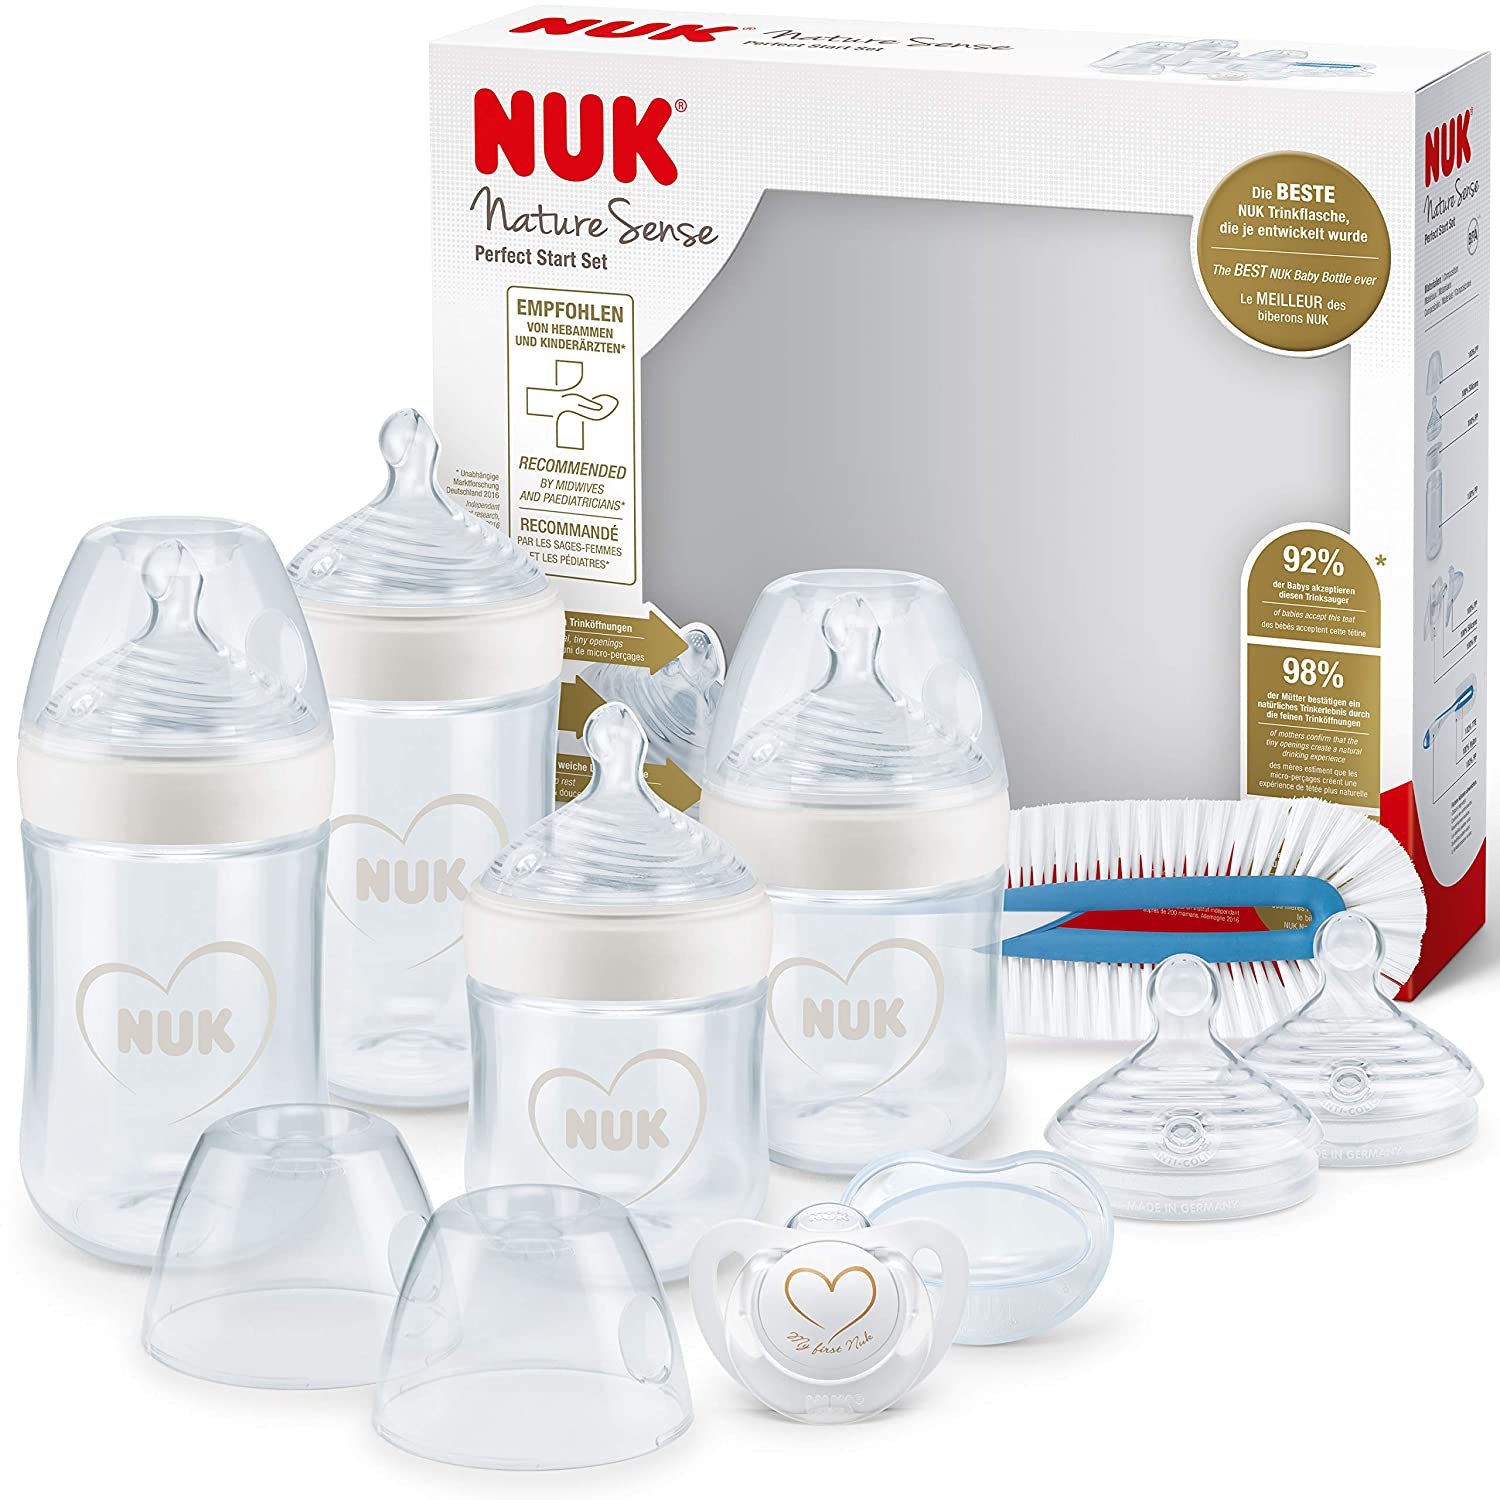 Nuk First Choice+ Perfect Start Baby Bottle Set Anti-Colic Baby Bottles (2 x 150 ml & 2 x 300 ml), Bottle Brush & More | BPA Free | 0-6 Months With temperature control. blue